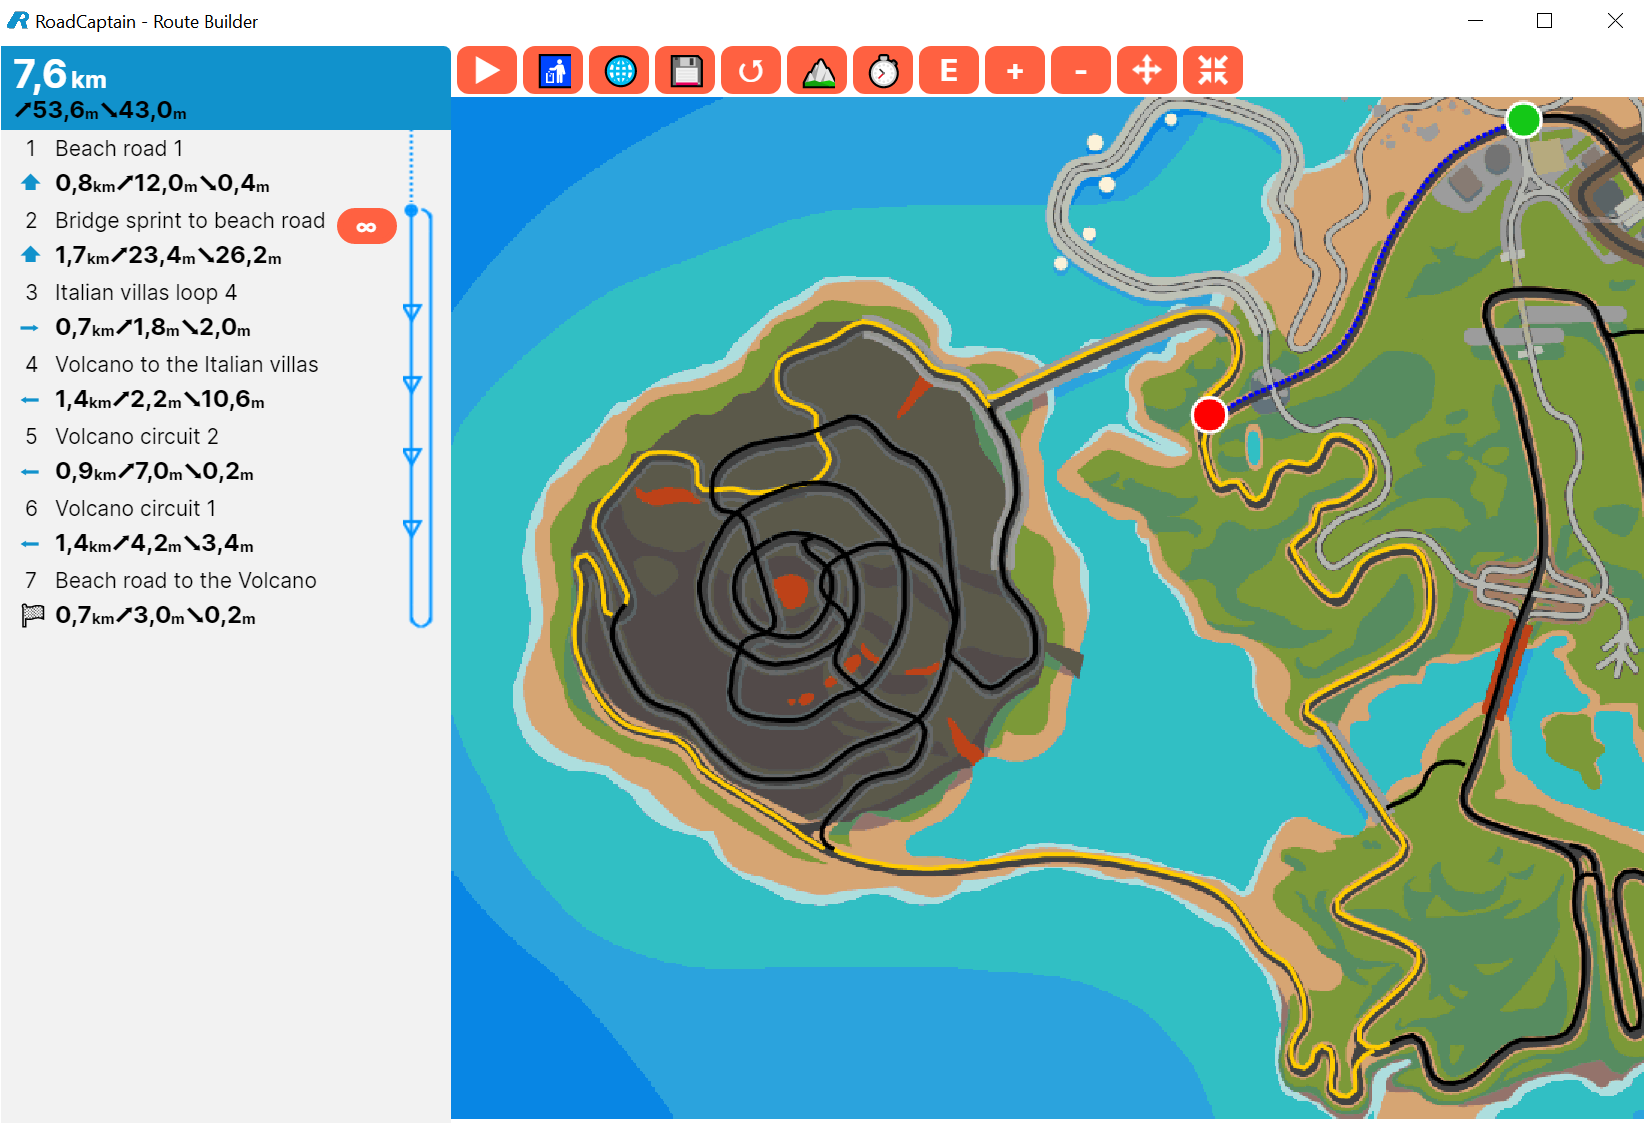 Screenshot of Route Builder with a looped route showing the colors